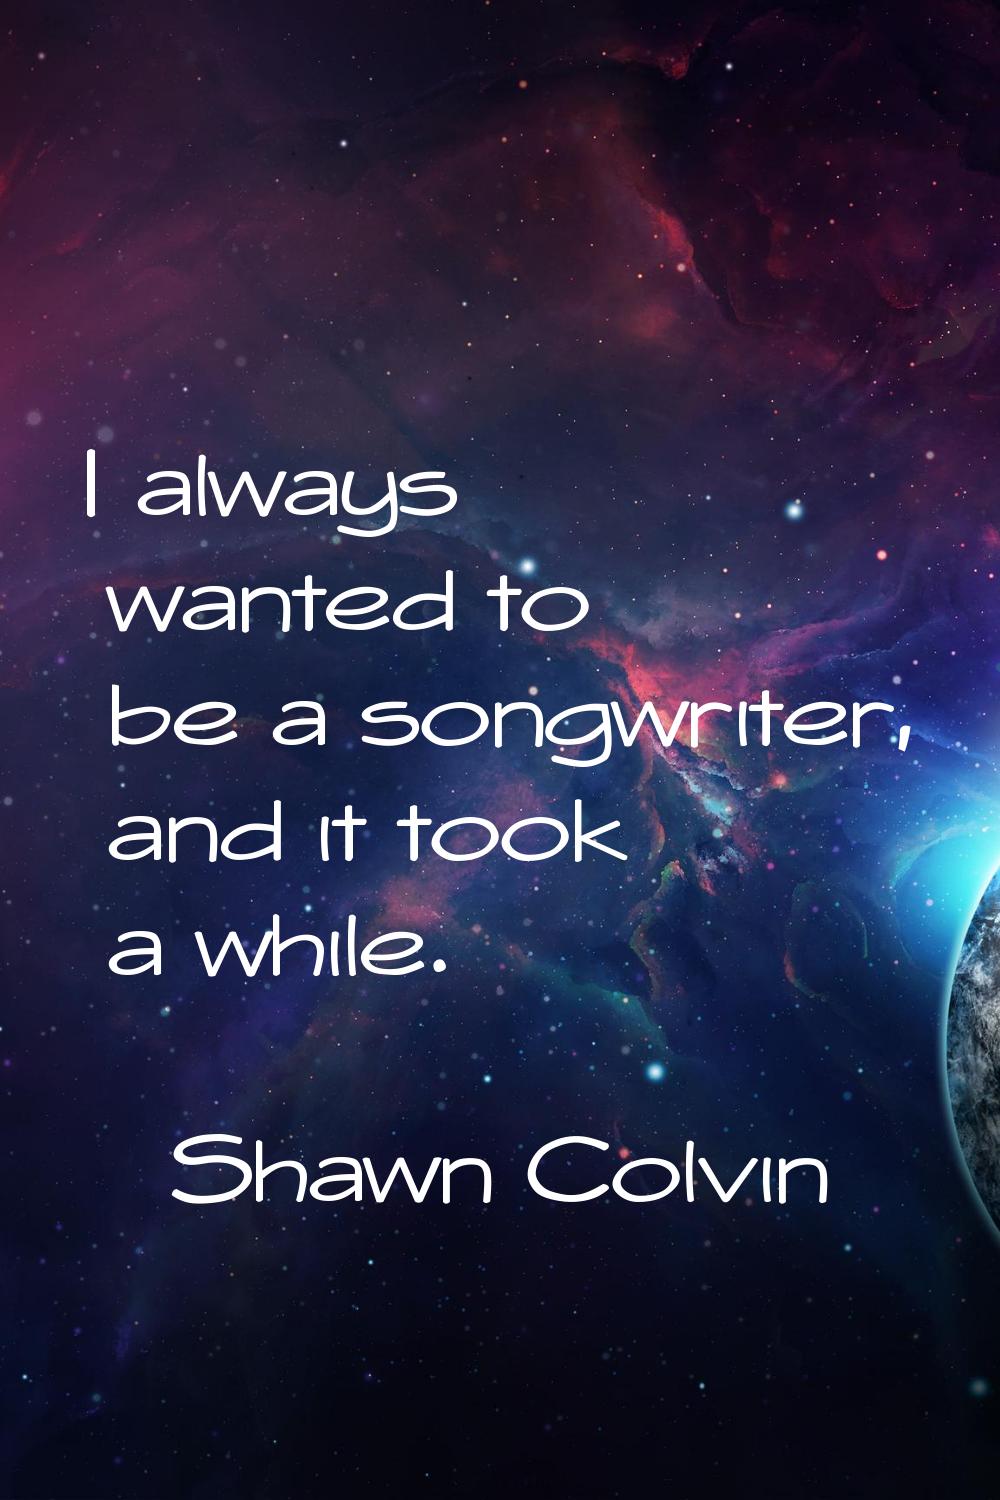 I always wanted to be a songwriter, and it took a while.